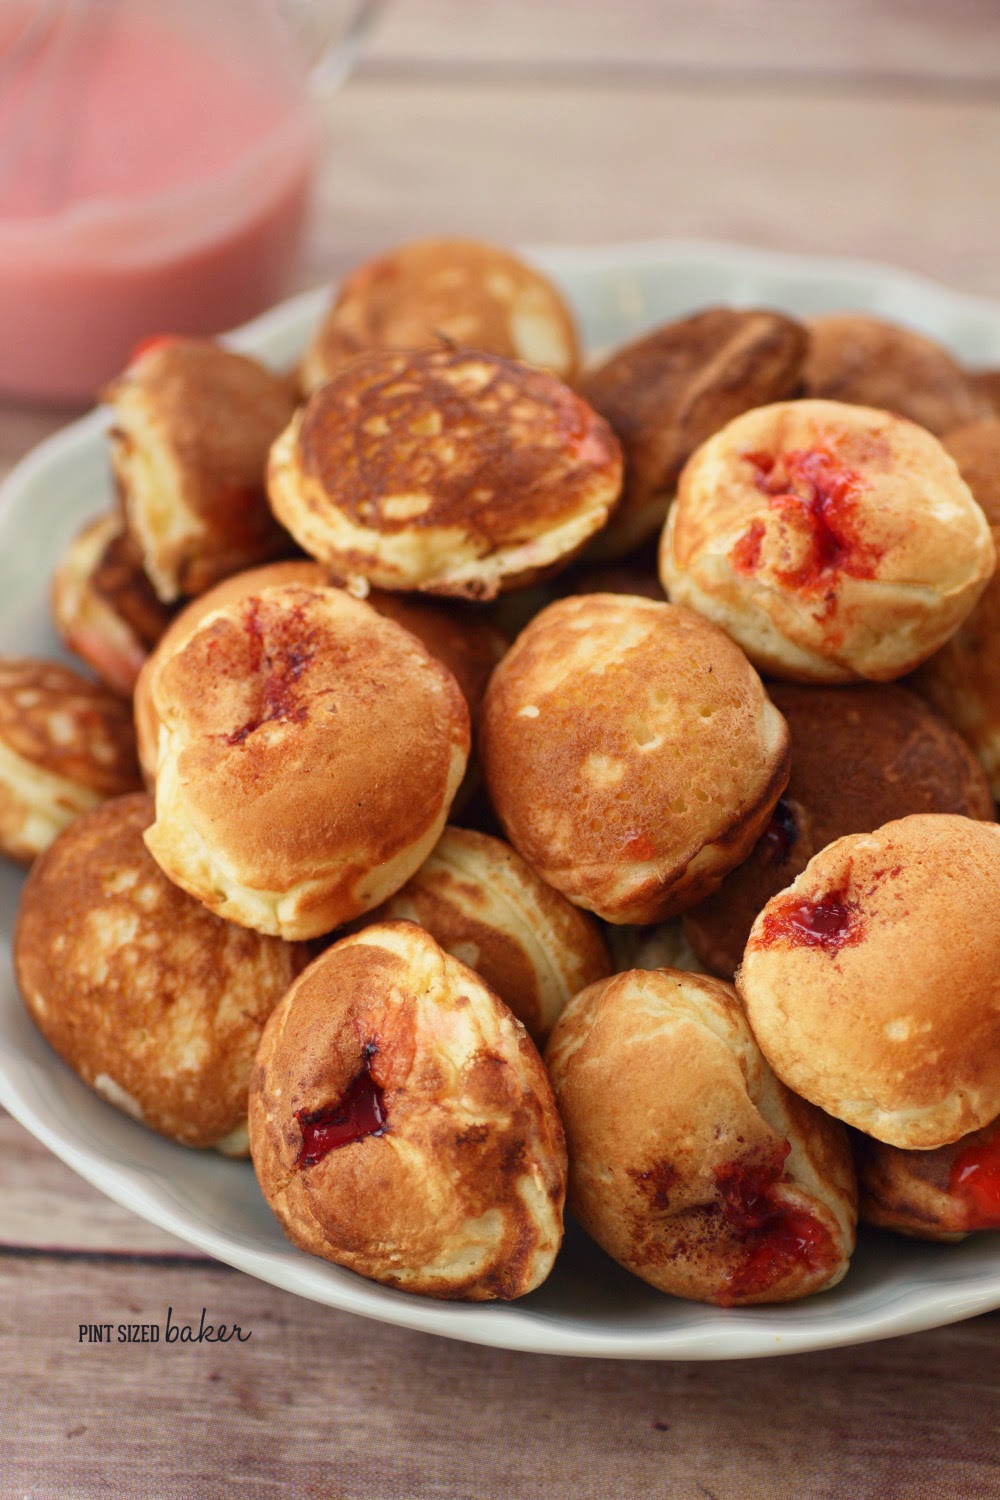 Mini Pancake Puffs stuffed with a cherry center. It's a fun treat! enjoy some Aebleskiver for dessert!